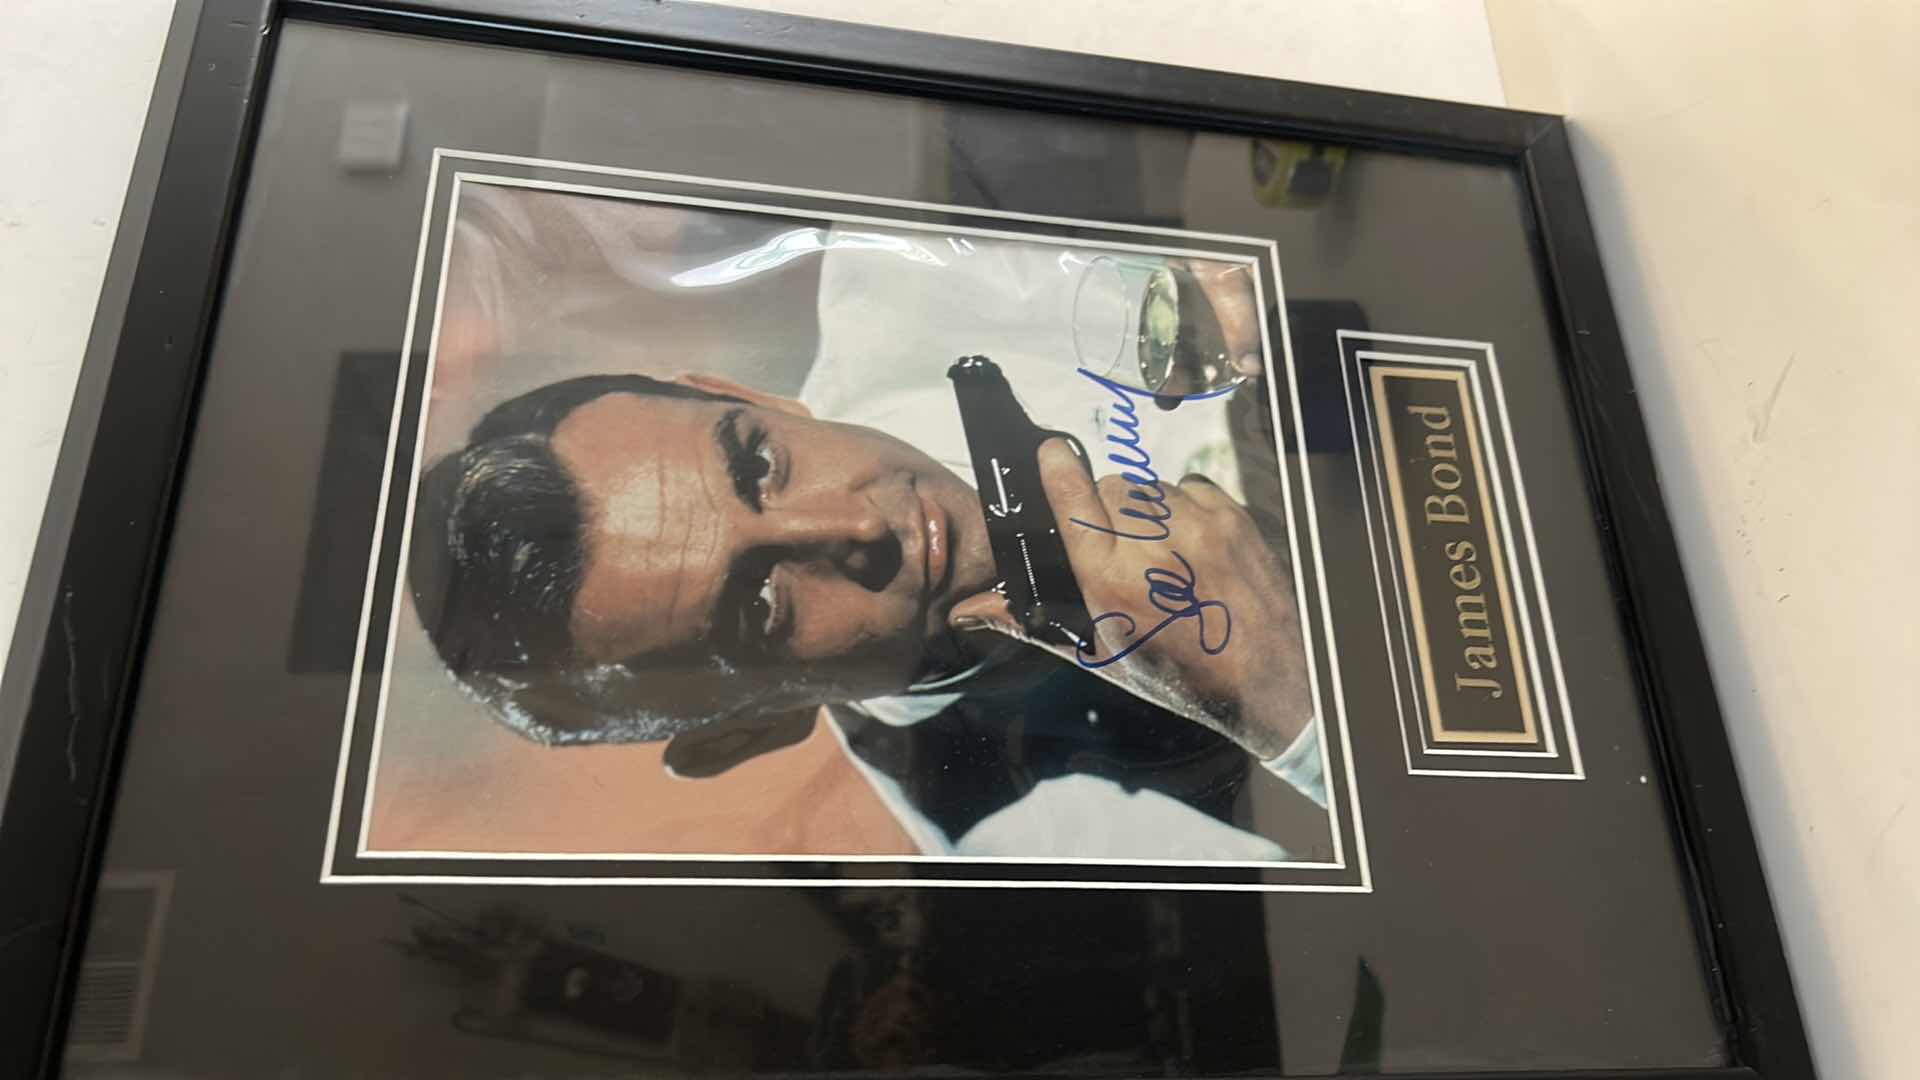 Photo 2 of AUTOGRAPHED CELEBRITY, JAMES BOND “SEAN CONNERY” PHOTO FRAMED 14.5” x 18”